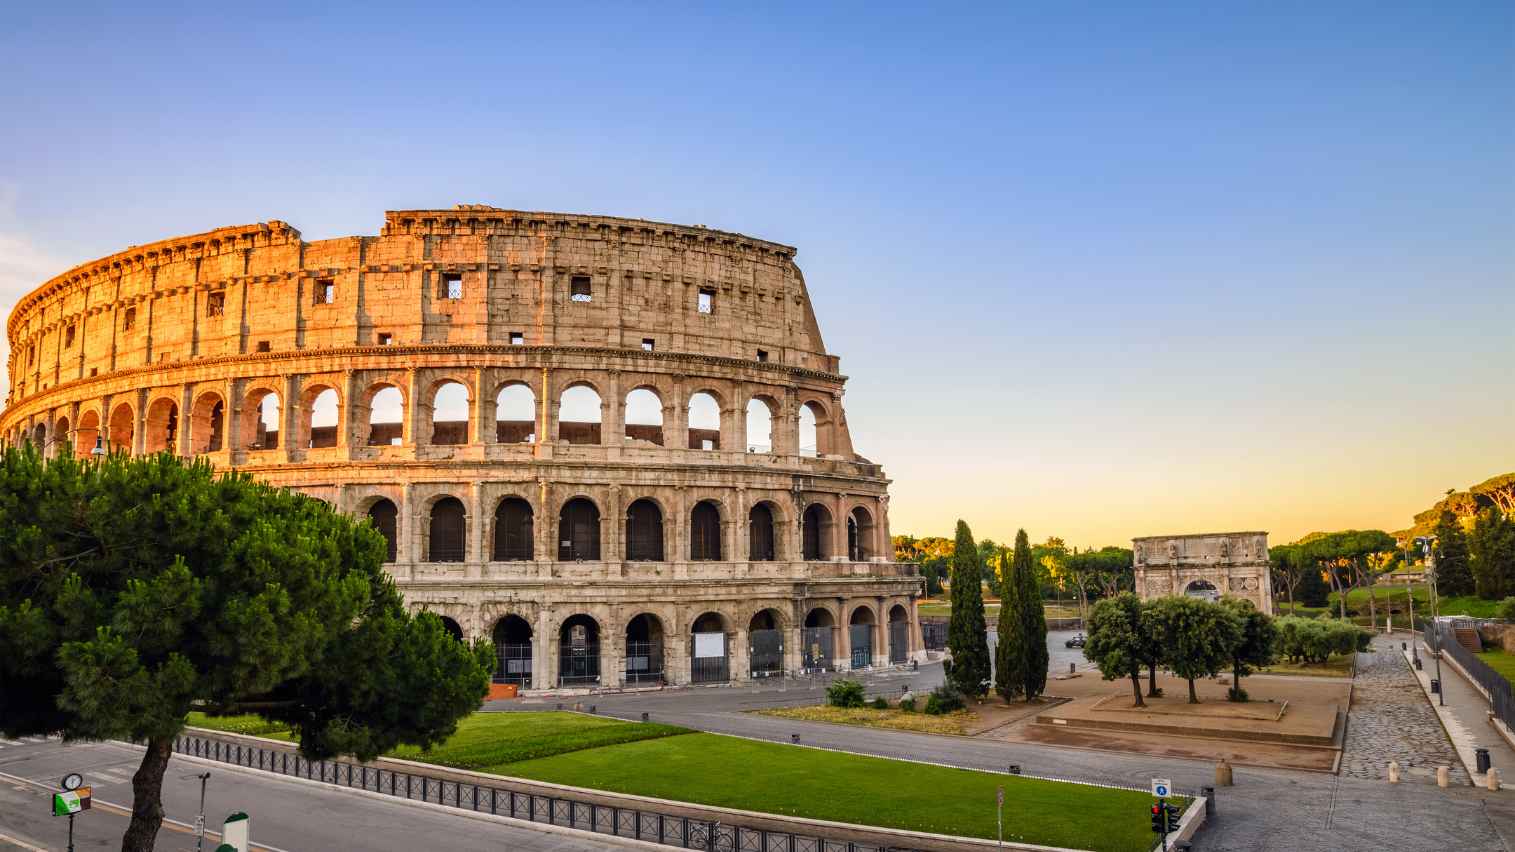 Planning a Trip to Italy in September